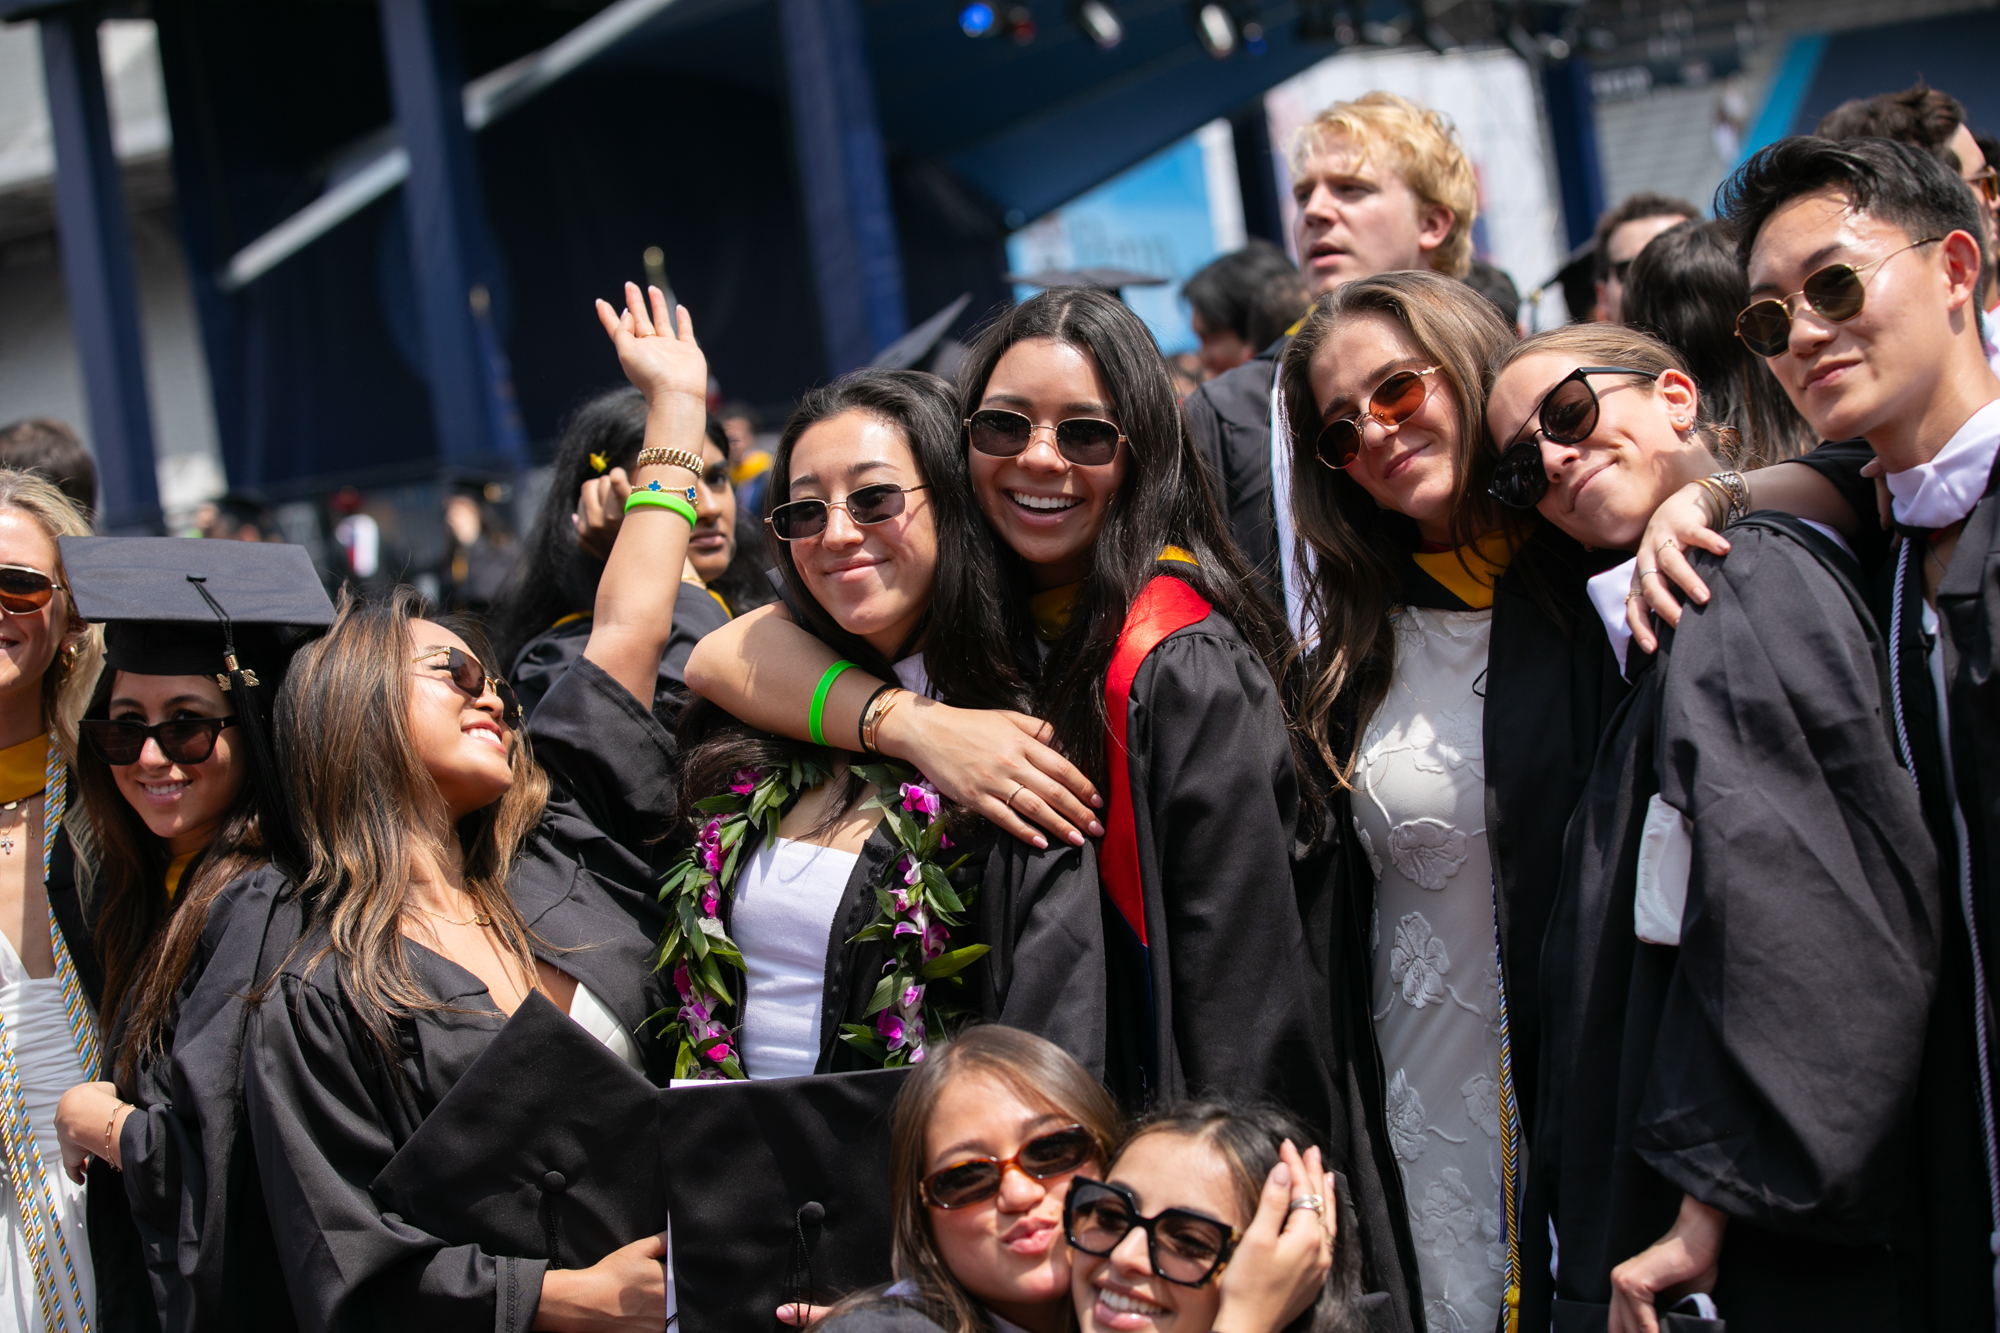 students celebrate after commencement